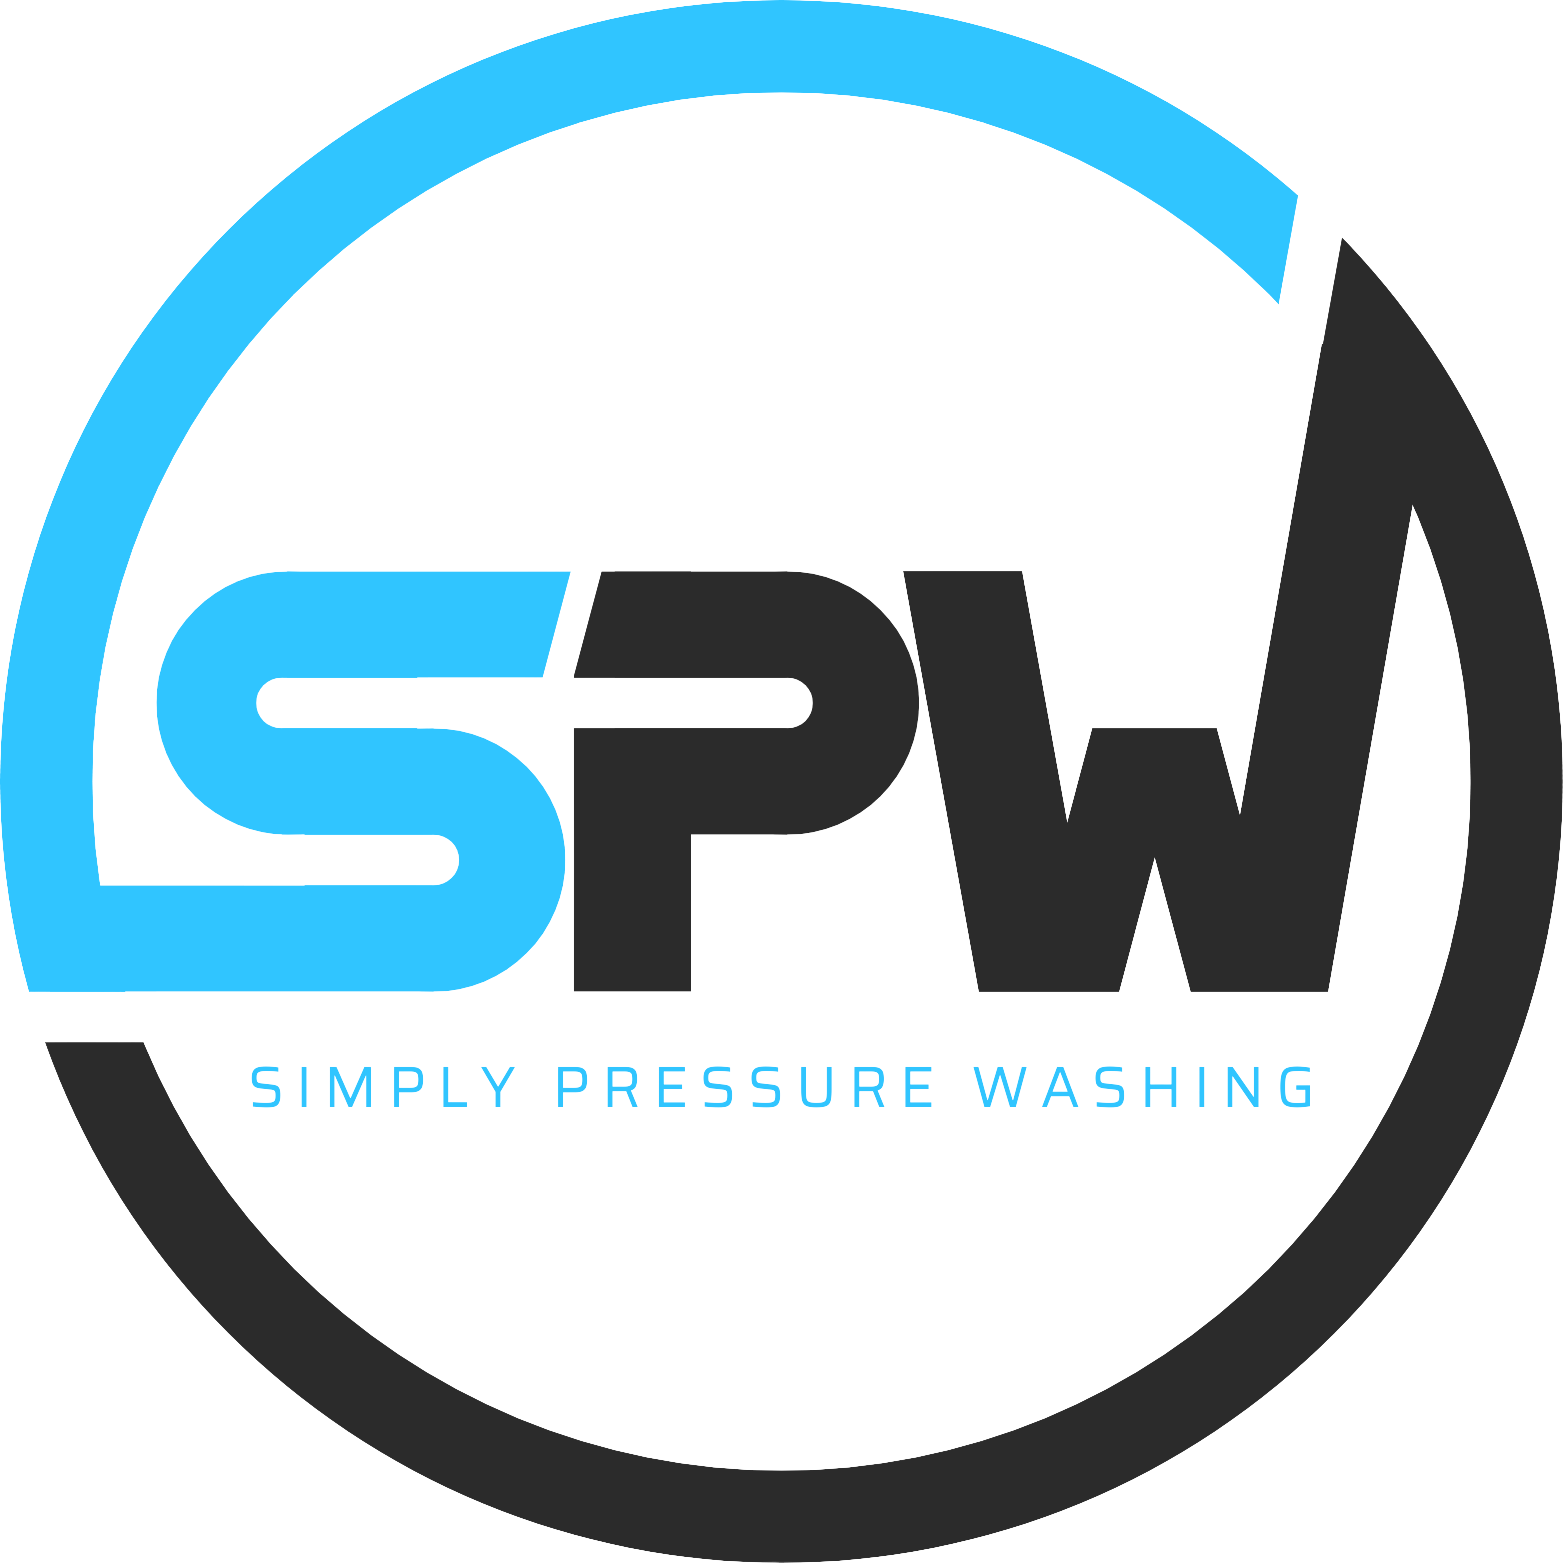 An image of the company logo, a circle containing the letters SPW